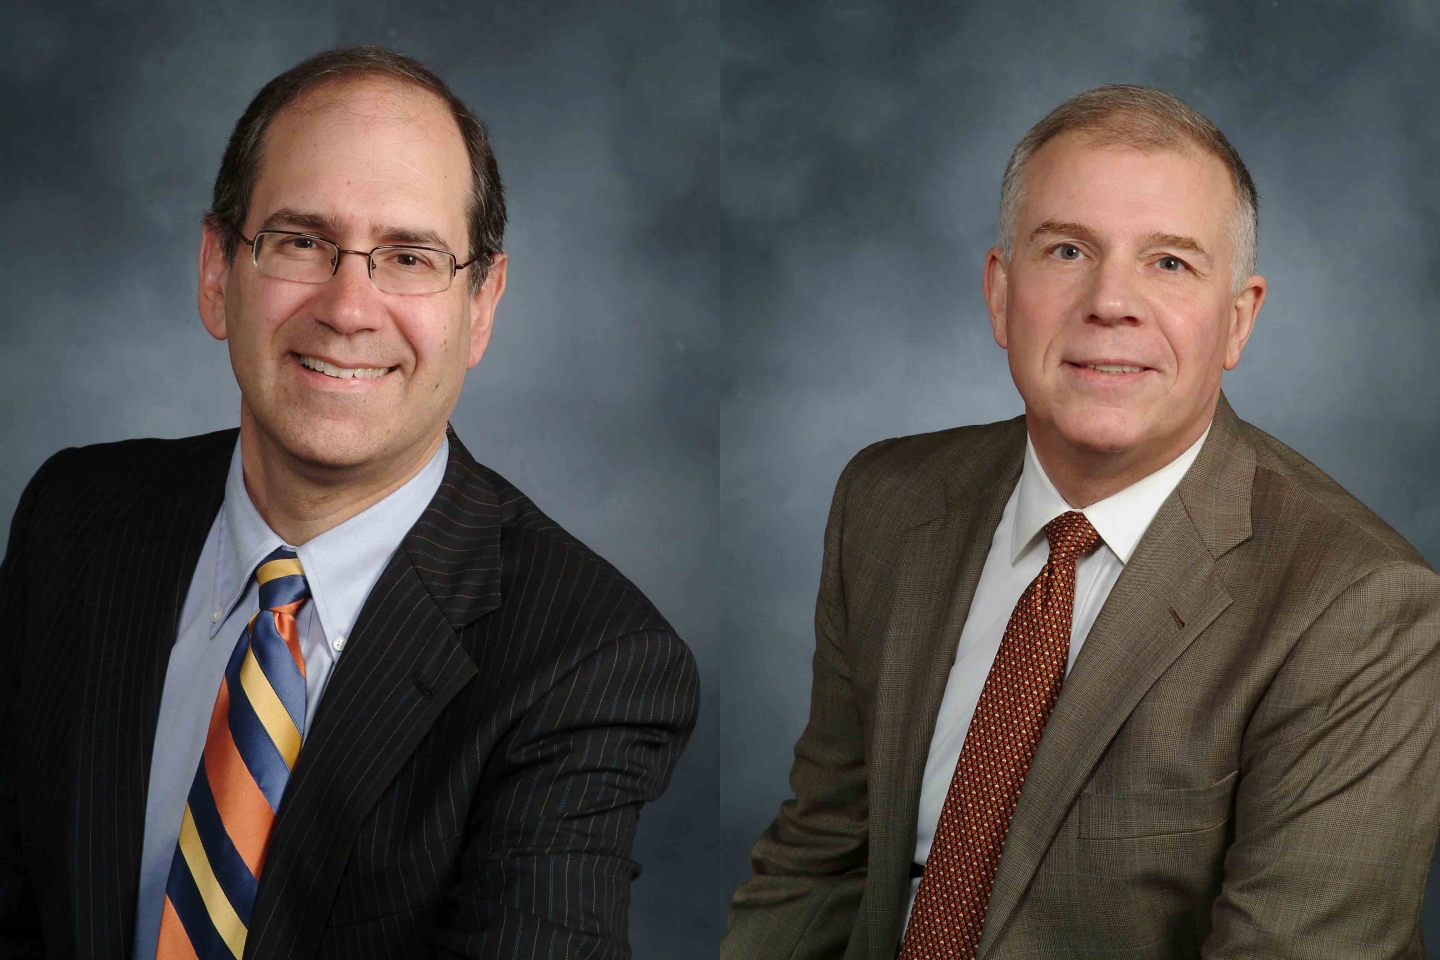 Headshots of Drs. Joel Stein and Michael O'Dell of Weill Cornell Medicine